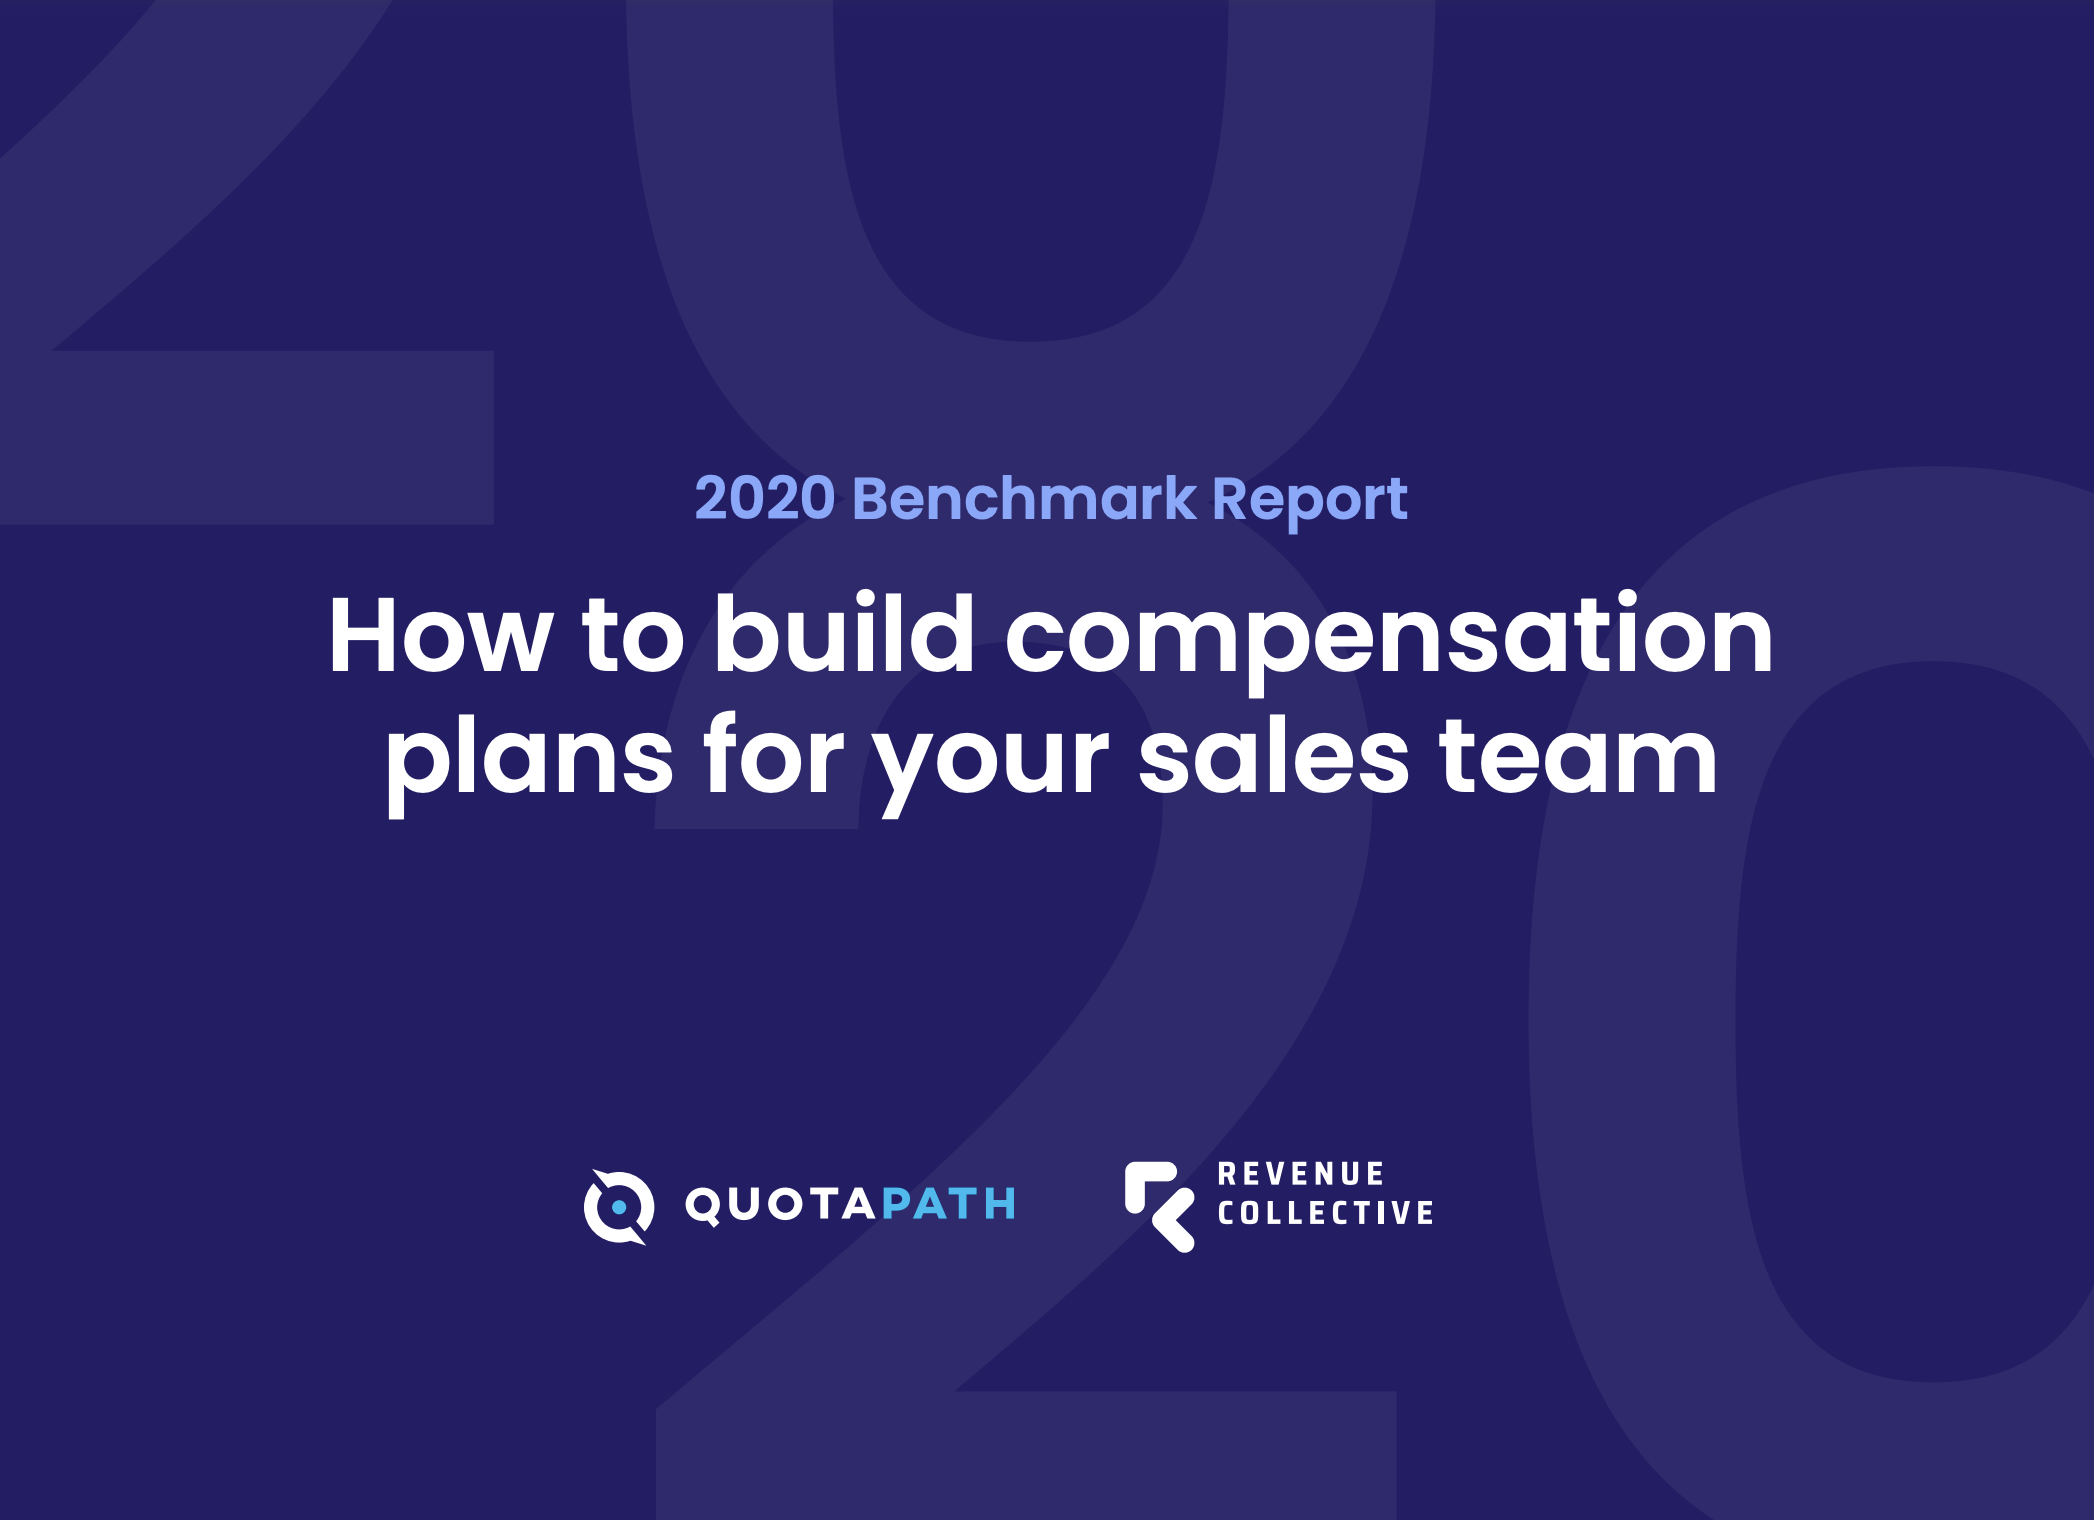 How to build compensation plans for your sales team